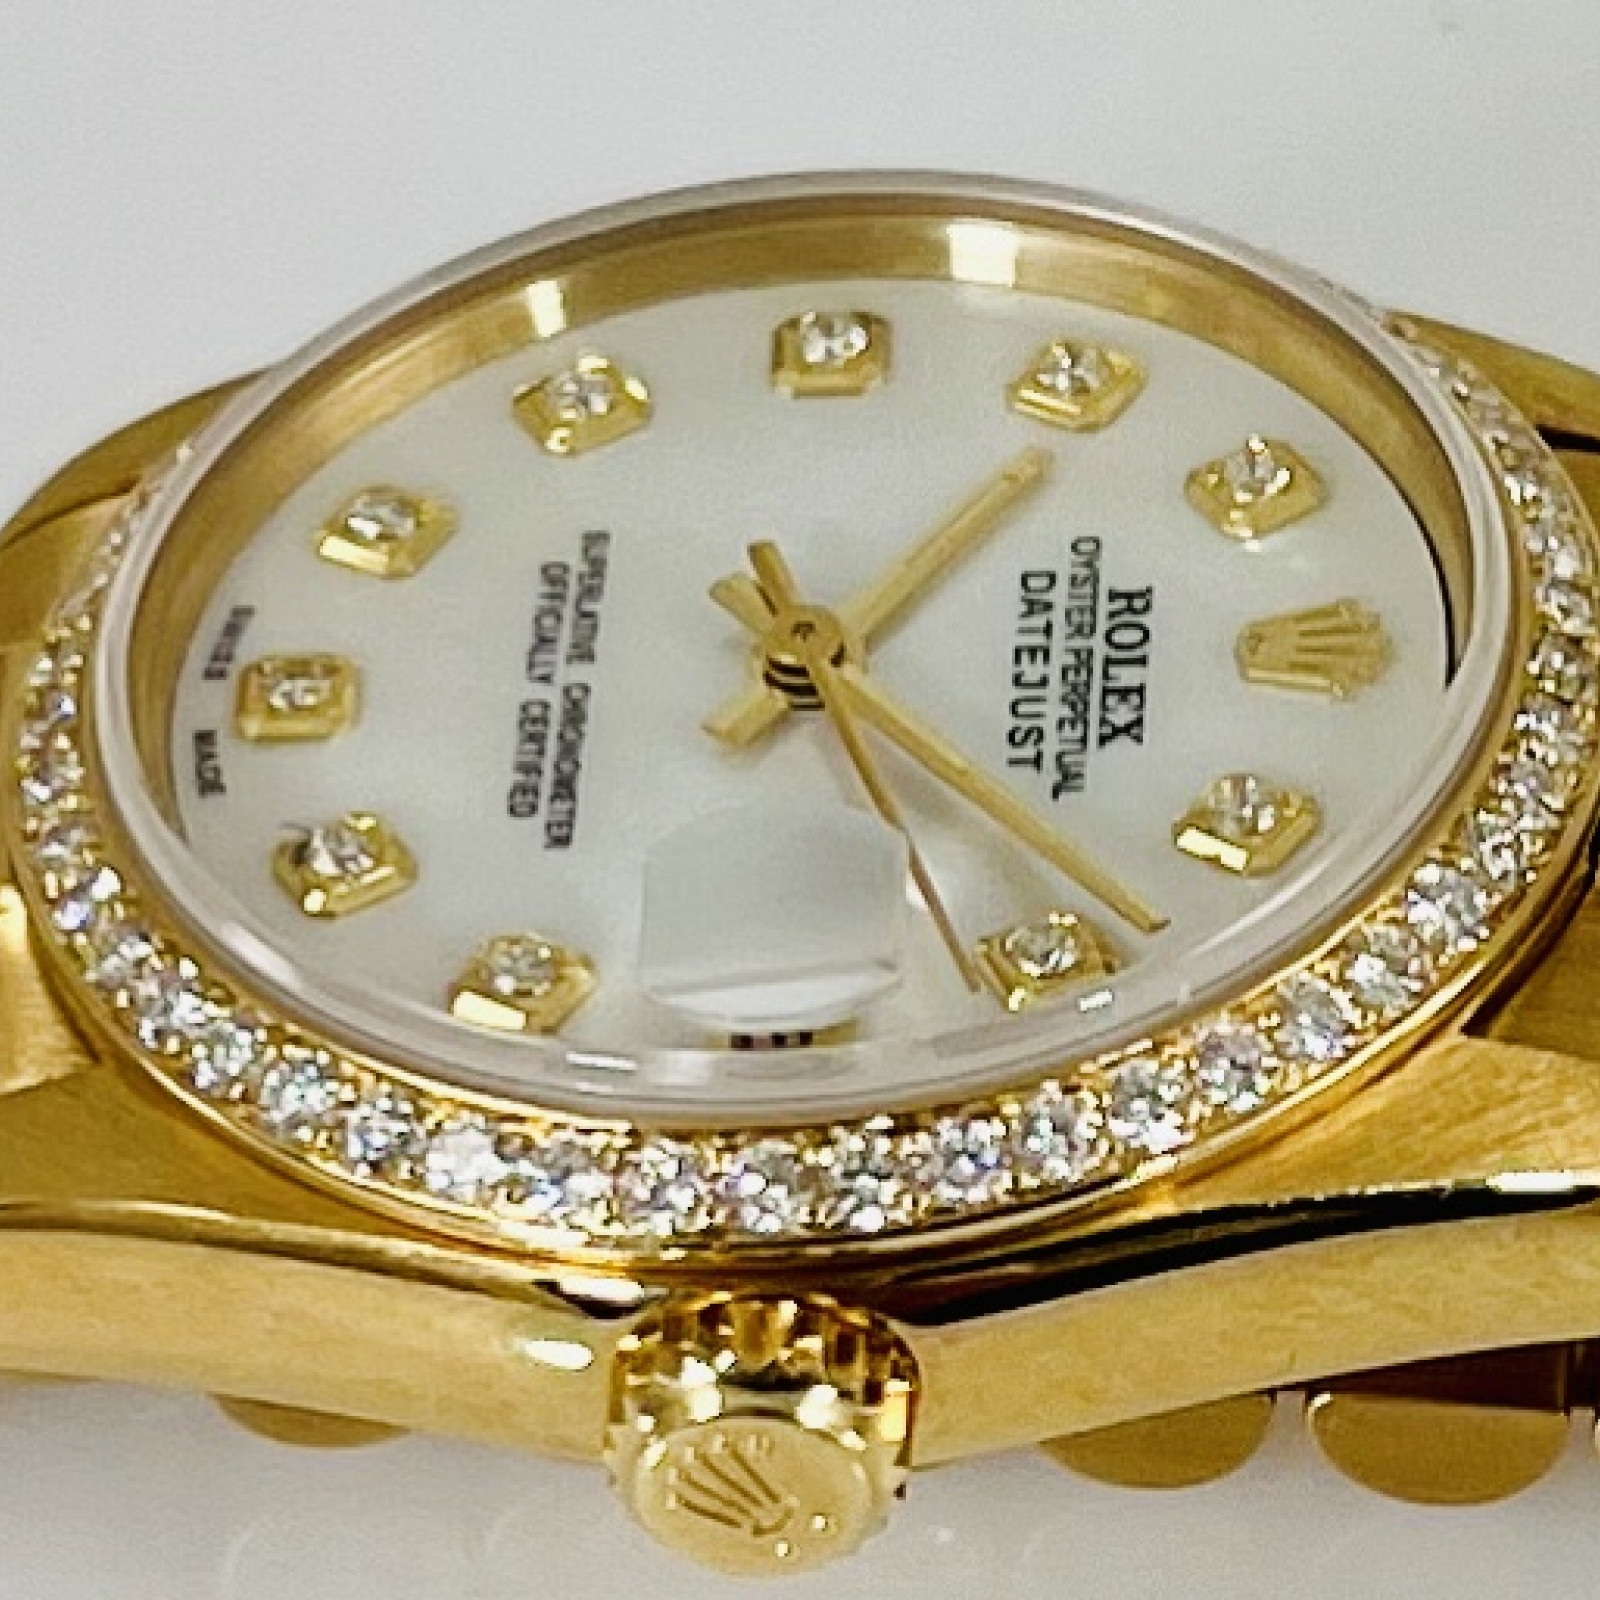 Rolex 68278 Mid Size 31 mm